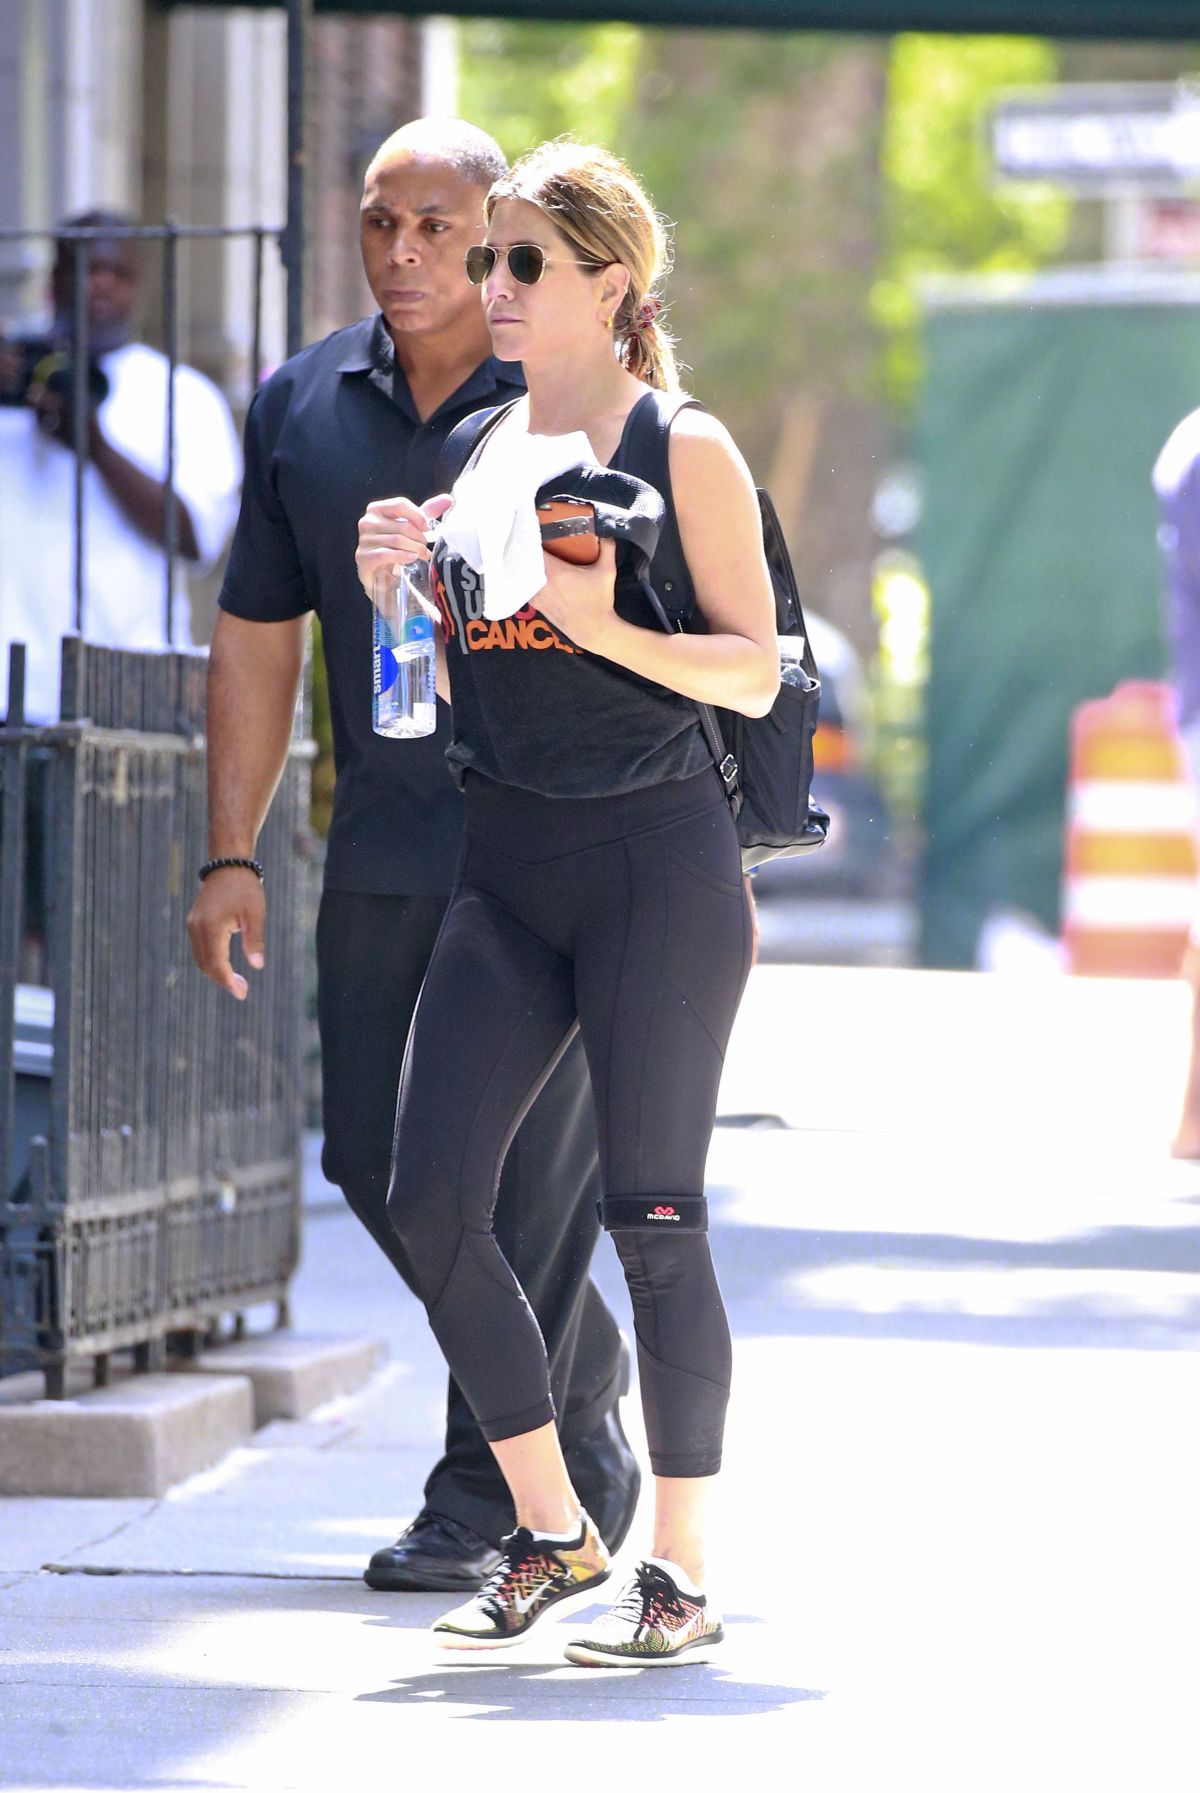 Jennifer Aniston in Spandex Heading to a gym in NY